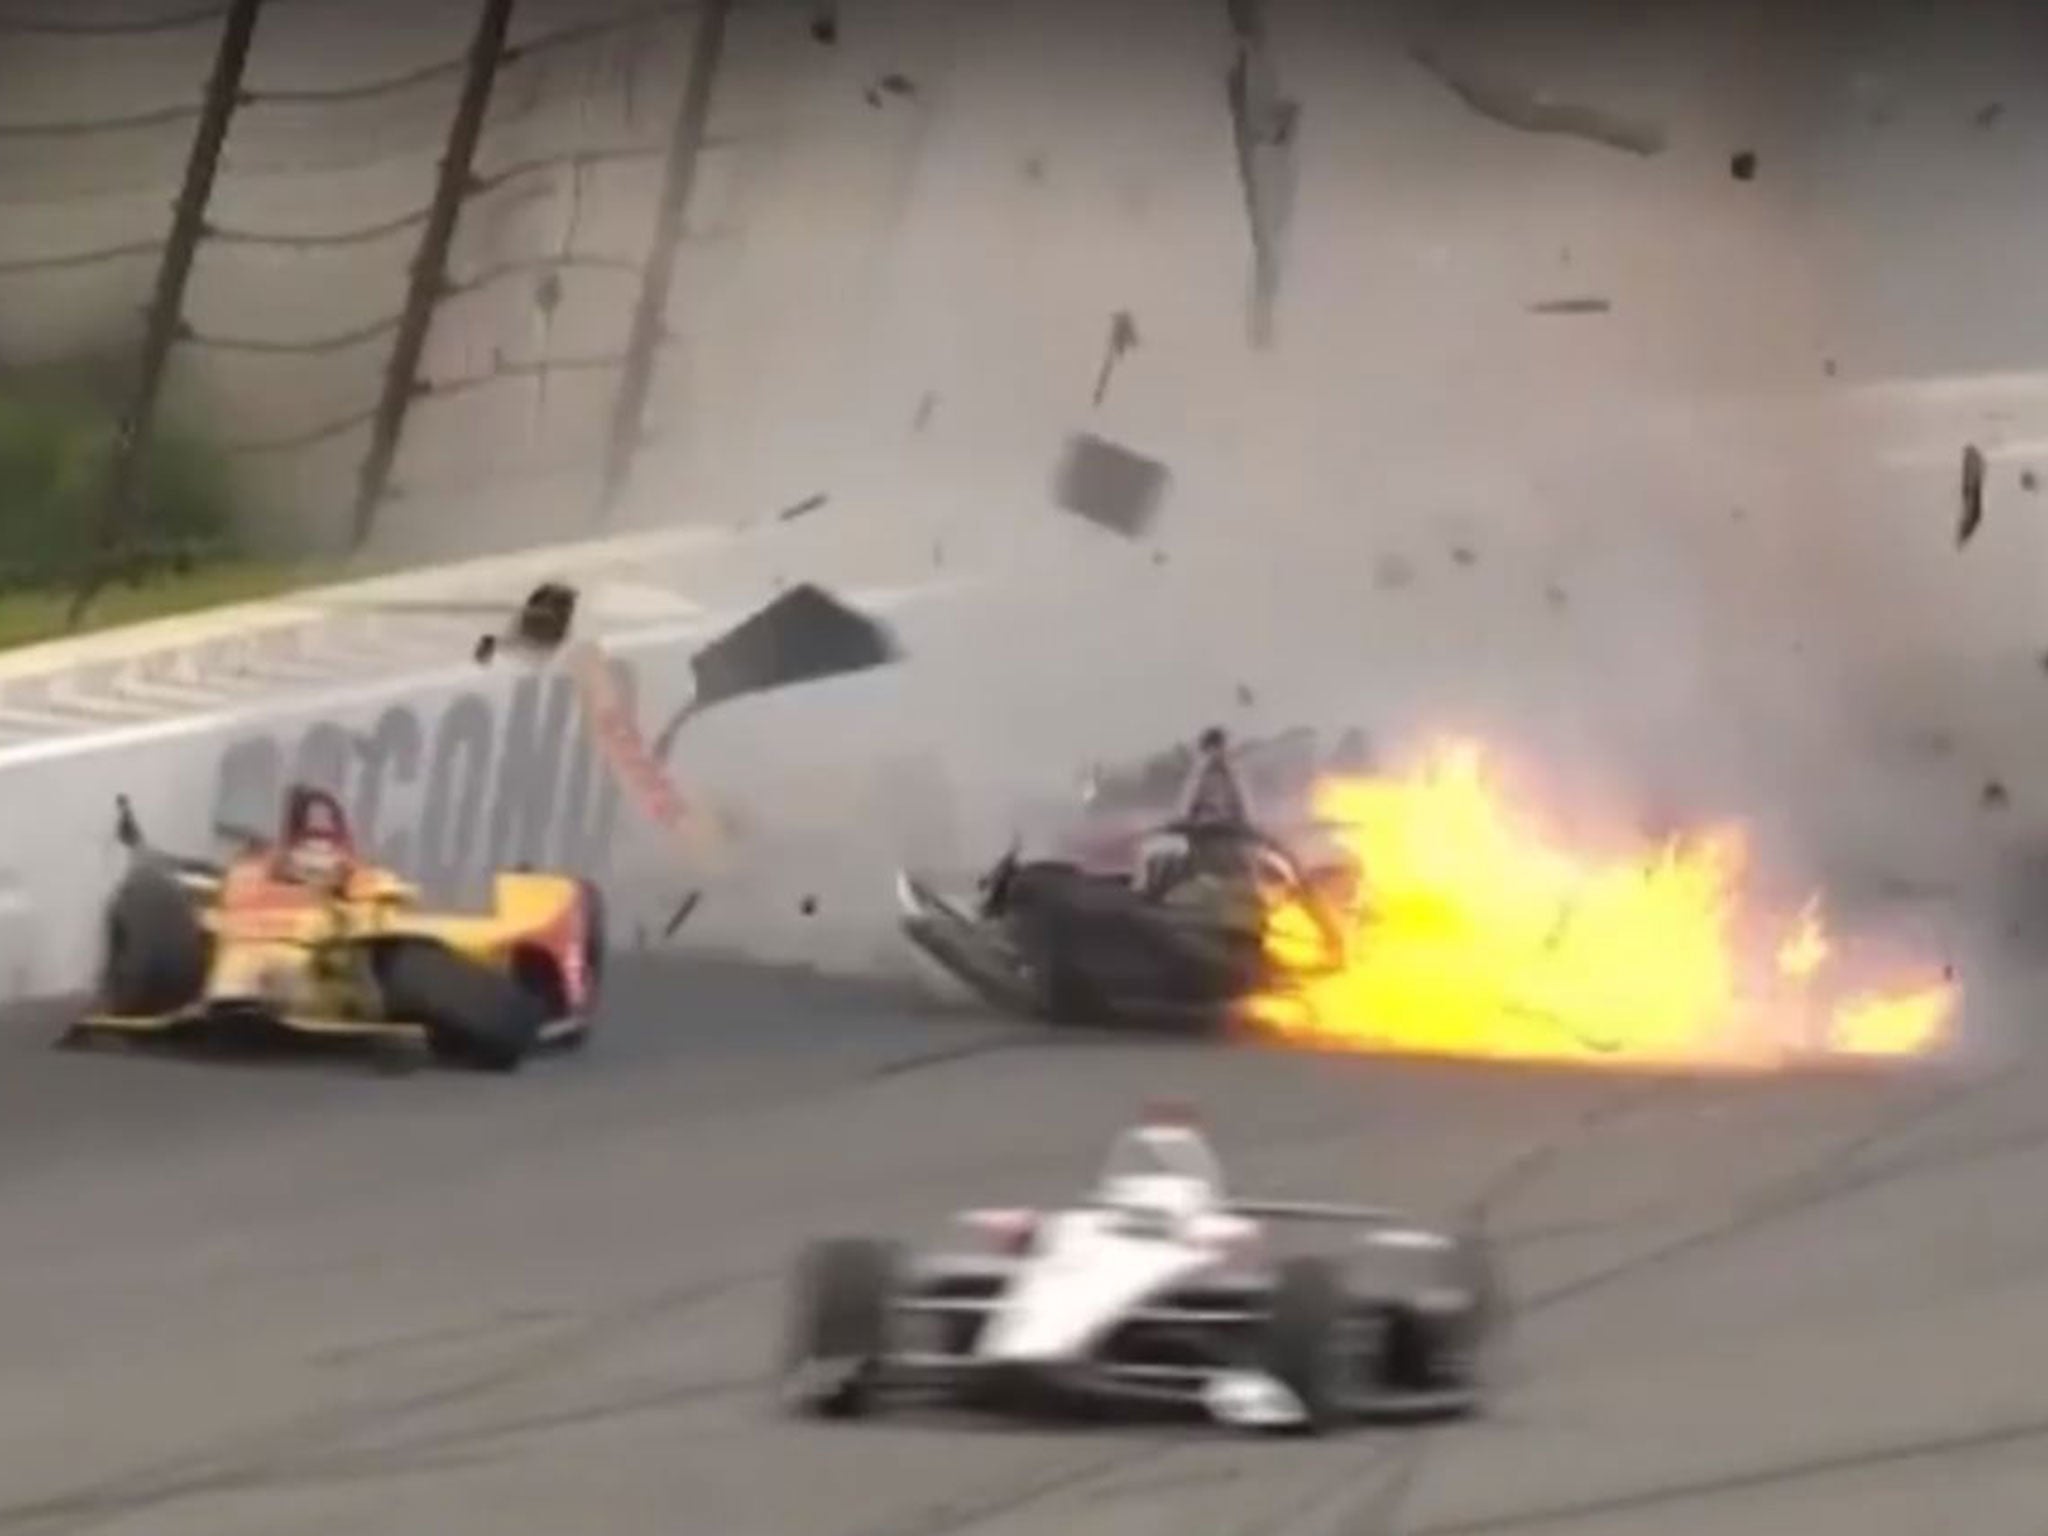 The Dallara-Honda momentarily caught fire as Wickens travelled back down the track